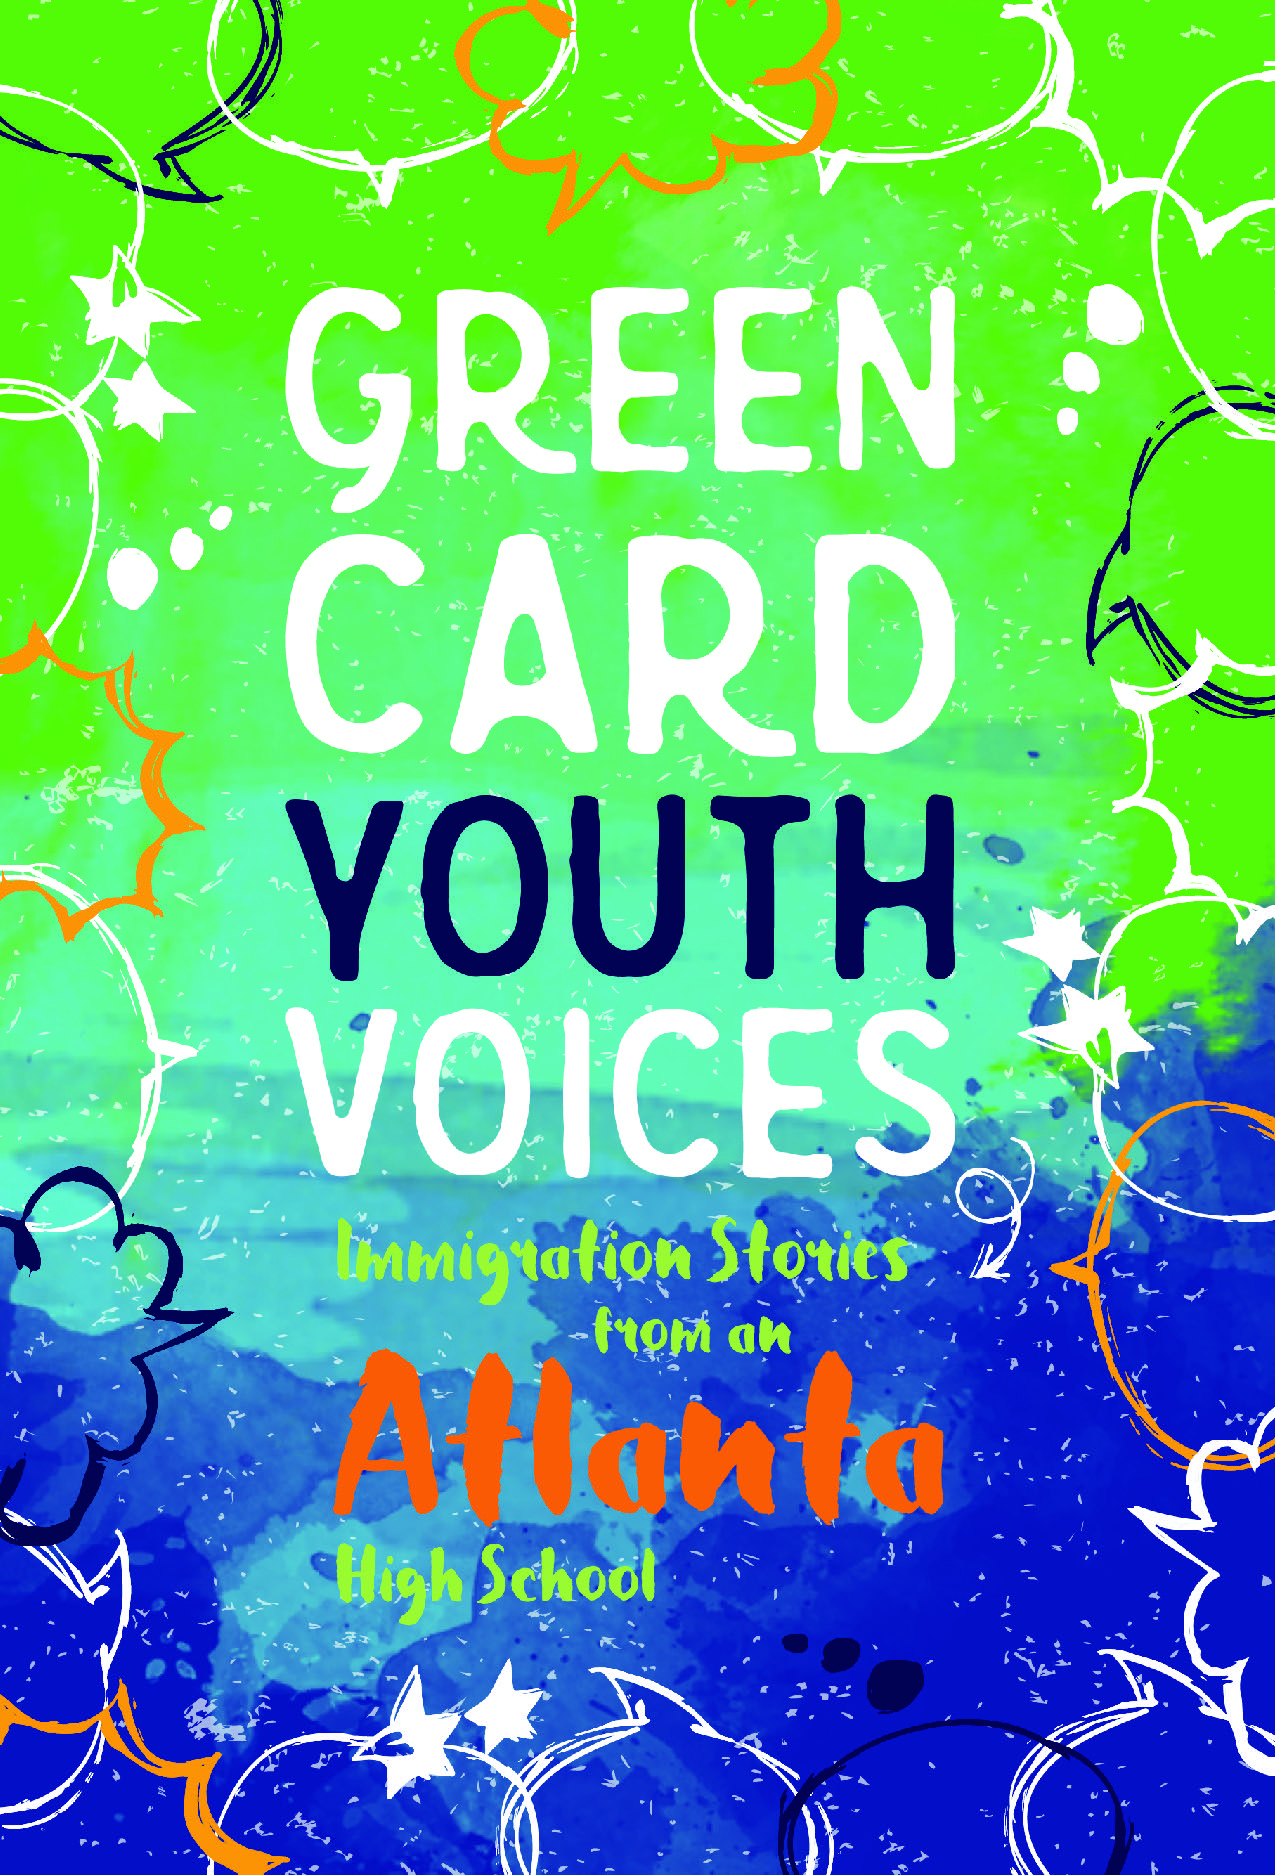 Book Cover for Green Card Youth Voices: Immigration Stories from an Atlanta High School